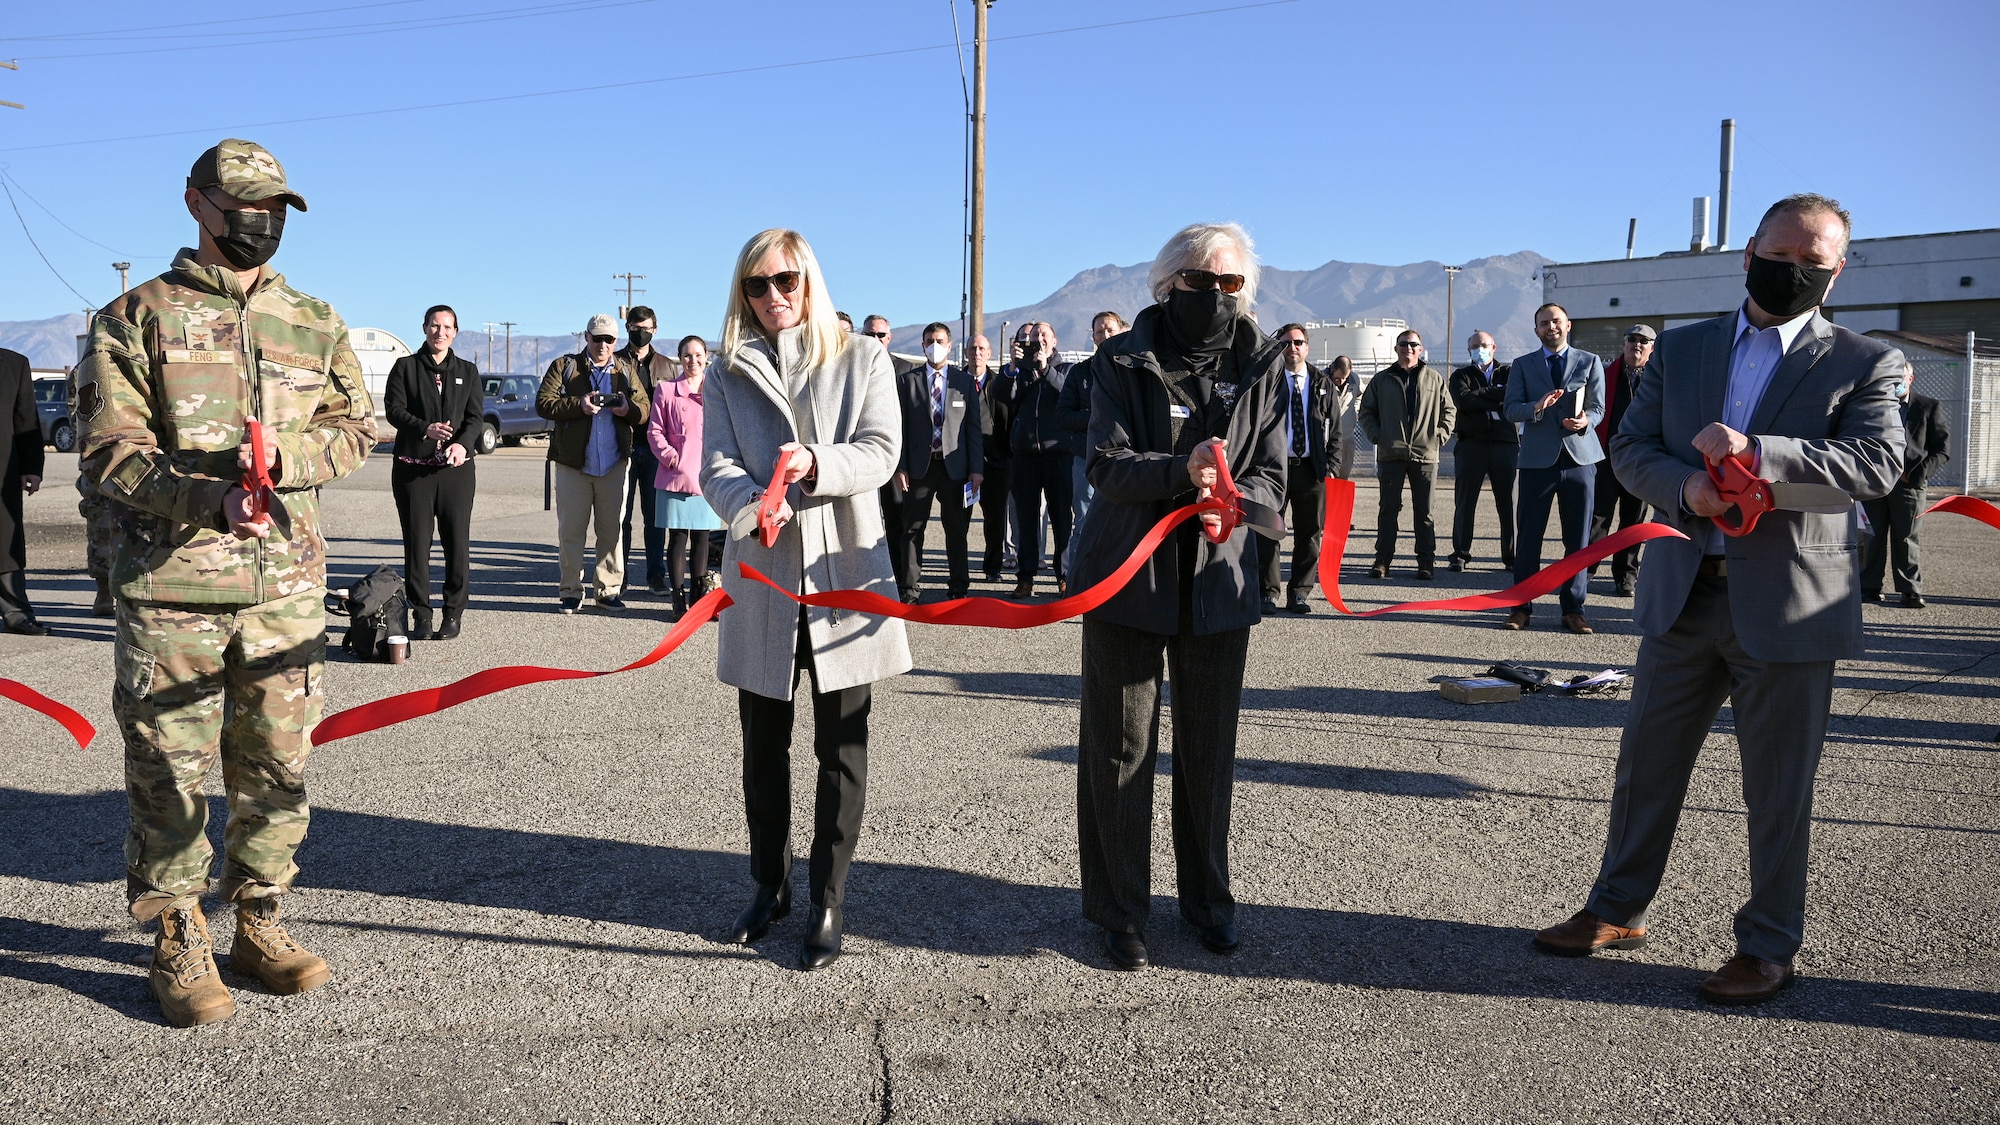 Leaders cut a ribbon to celebrate the first deployed and functional 5G network on a U.S. military installation at Hill Air Force Base